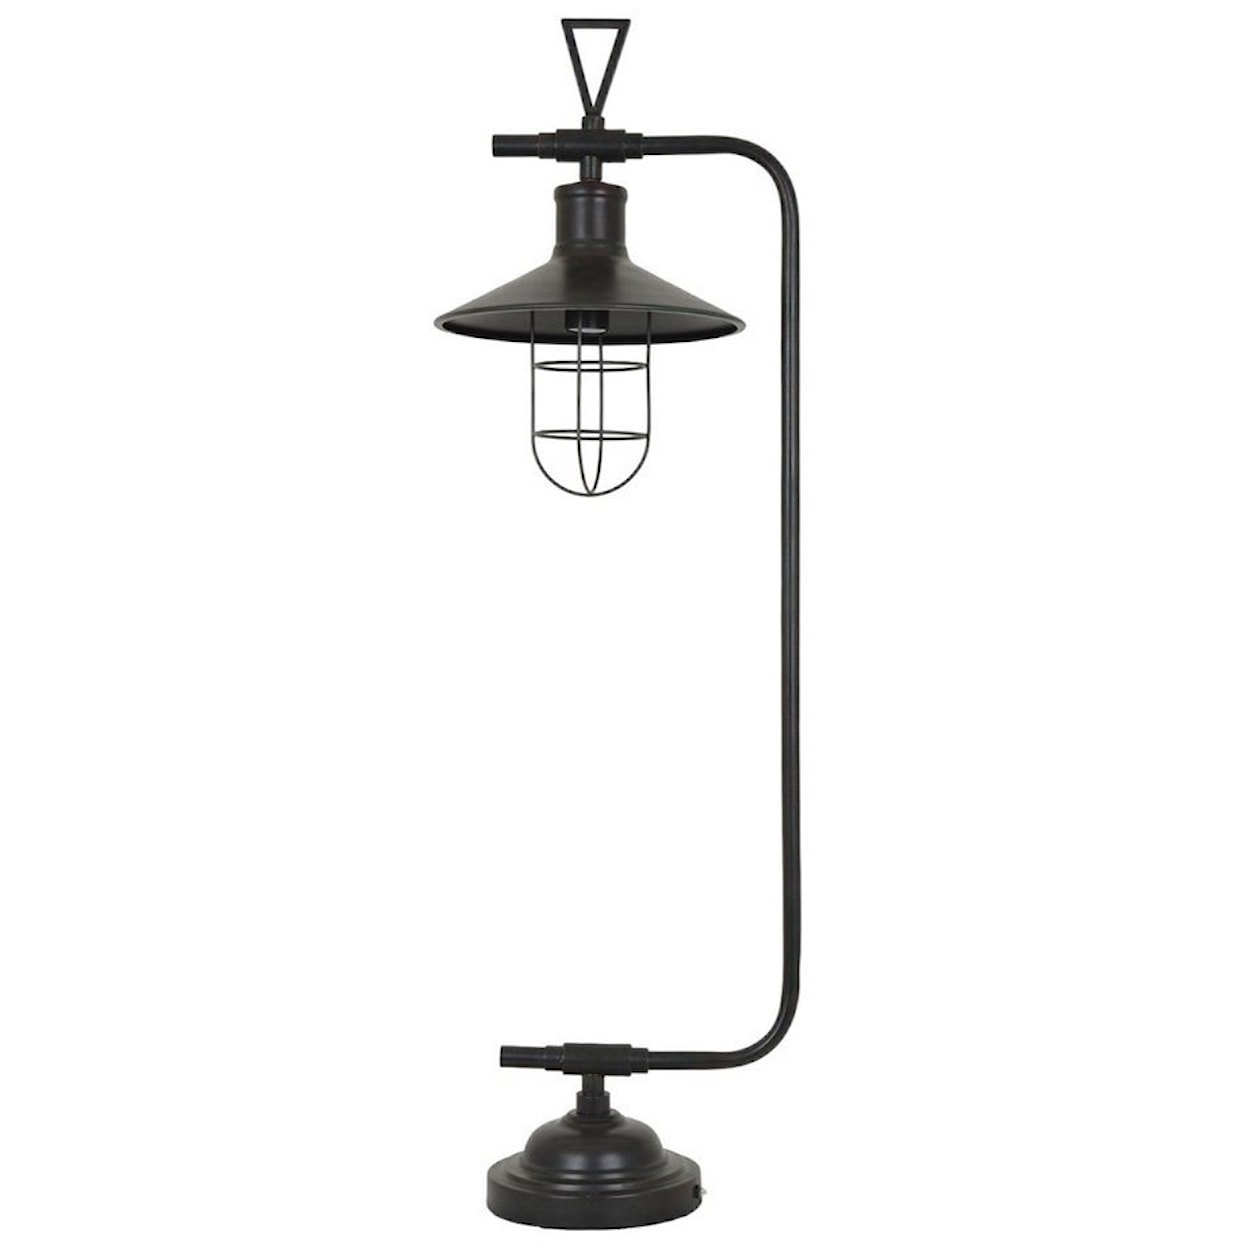 Crestview Collection Lighting Melbourne Table Pendant